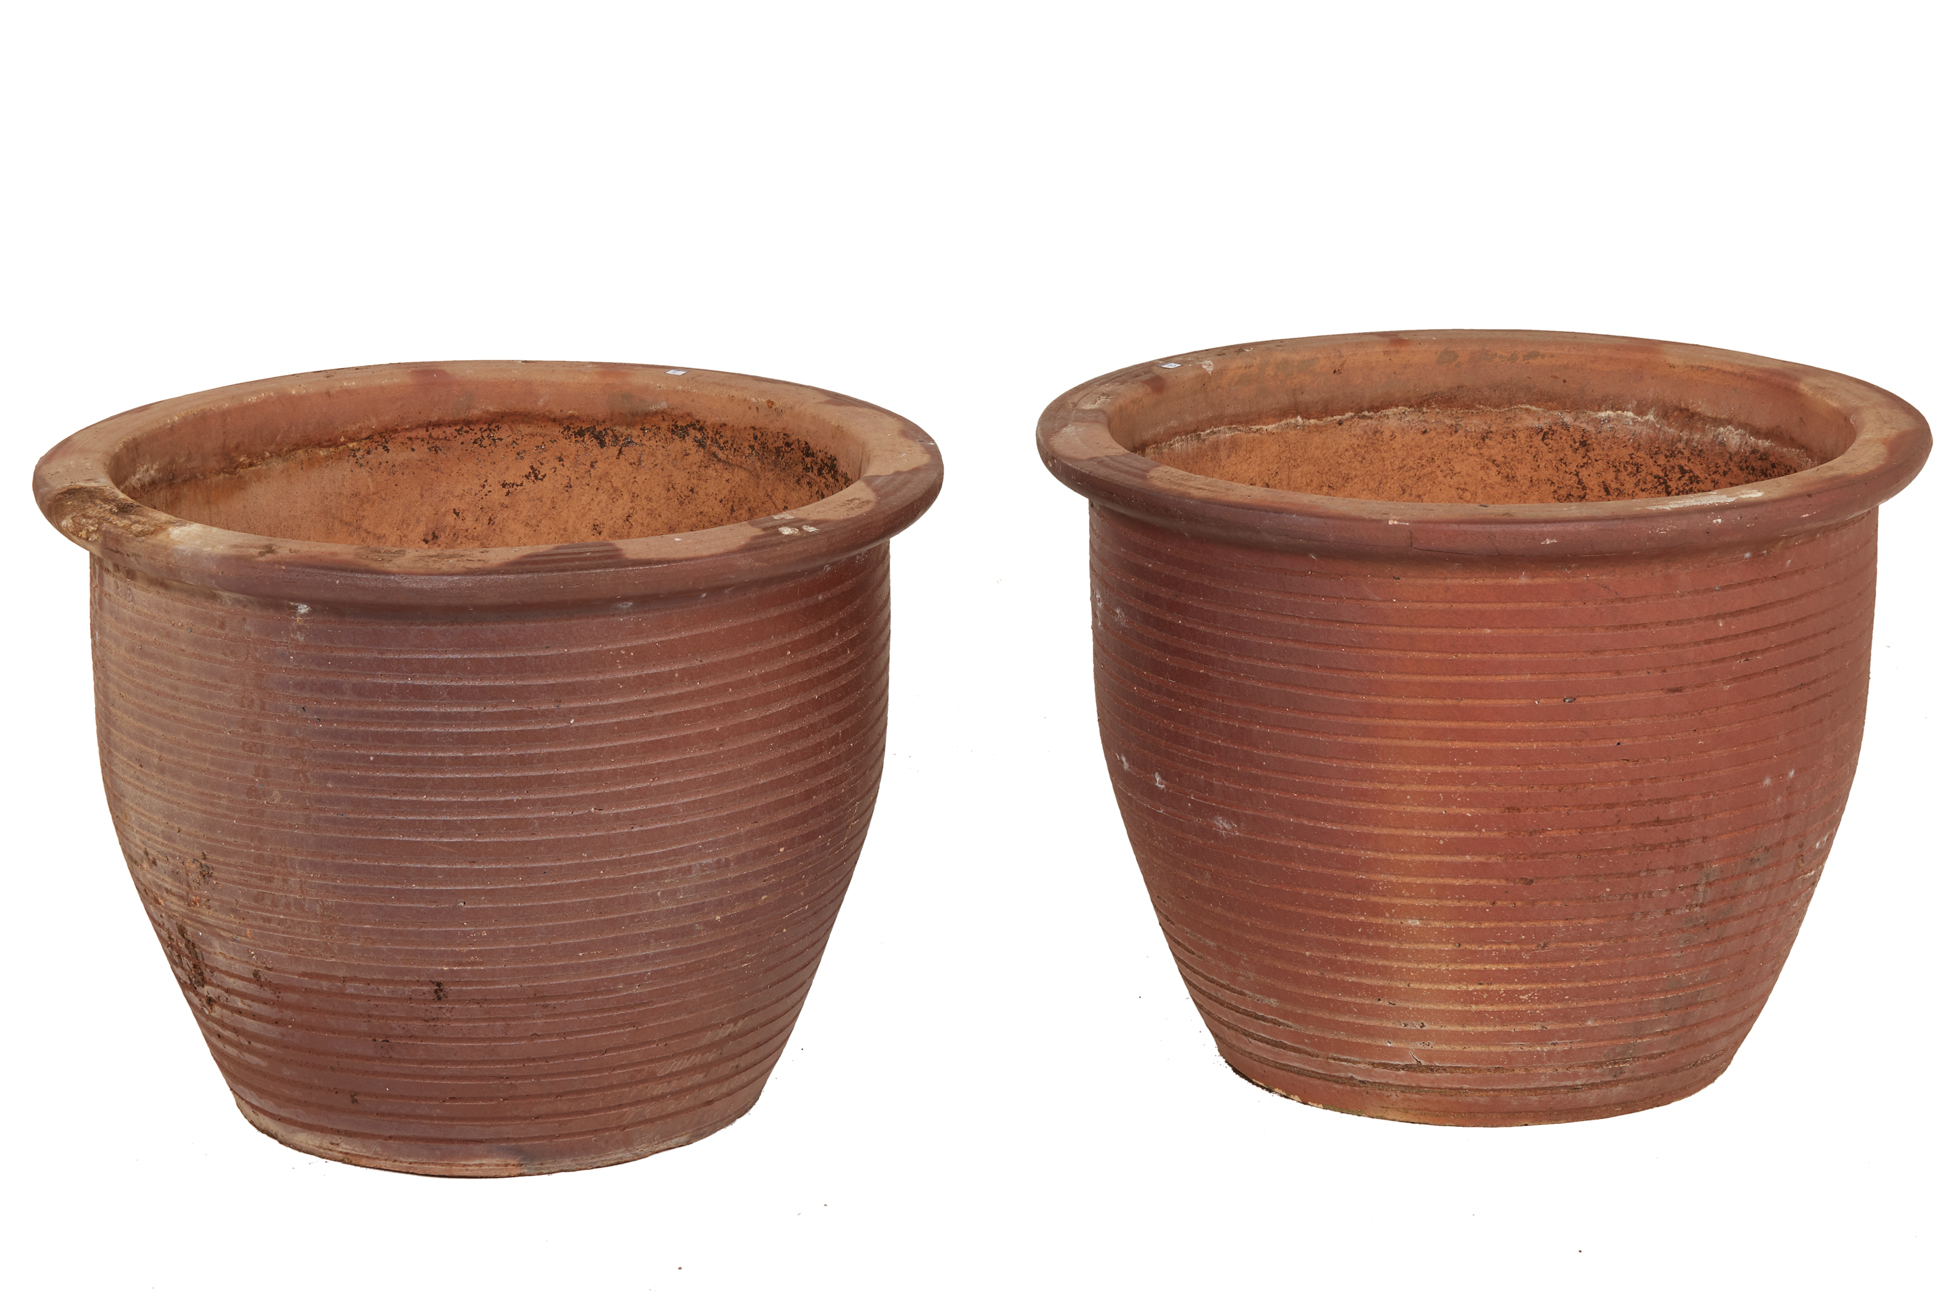 A LARGE PAIR OF TERRACOTTA POTS (2)